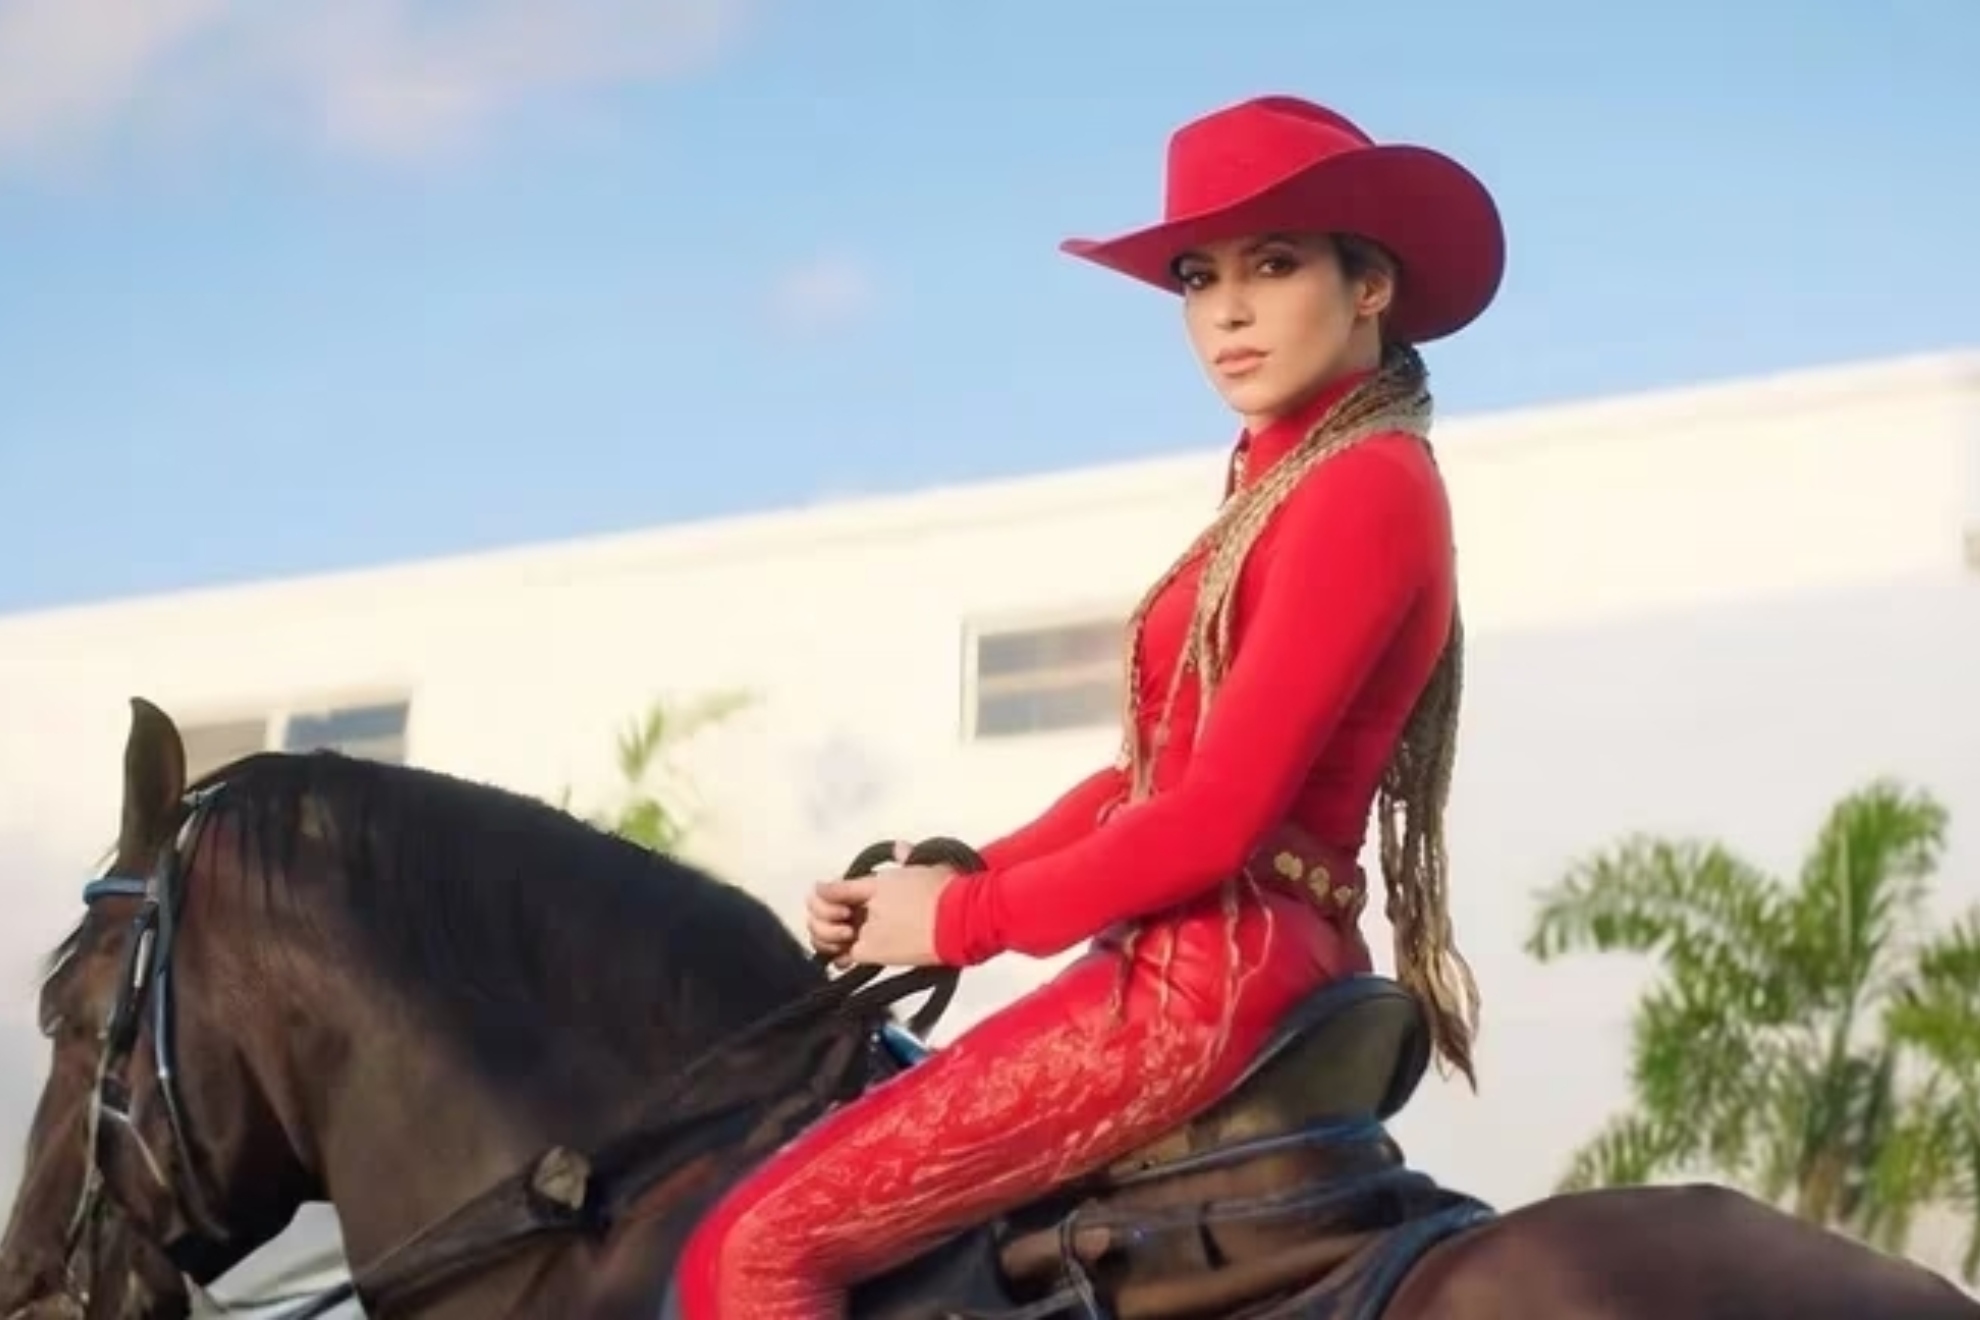 Shakira throws a jab at Piqué's father in her latest song 'El Jefe'.